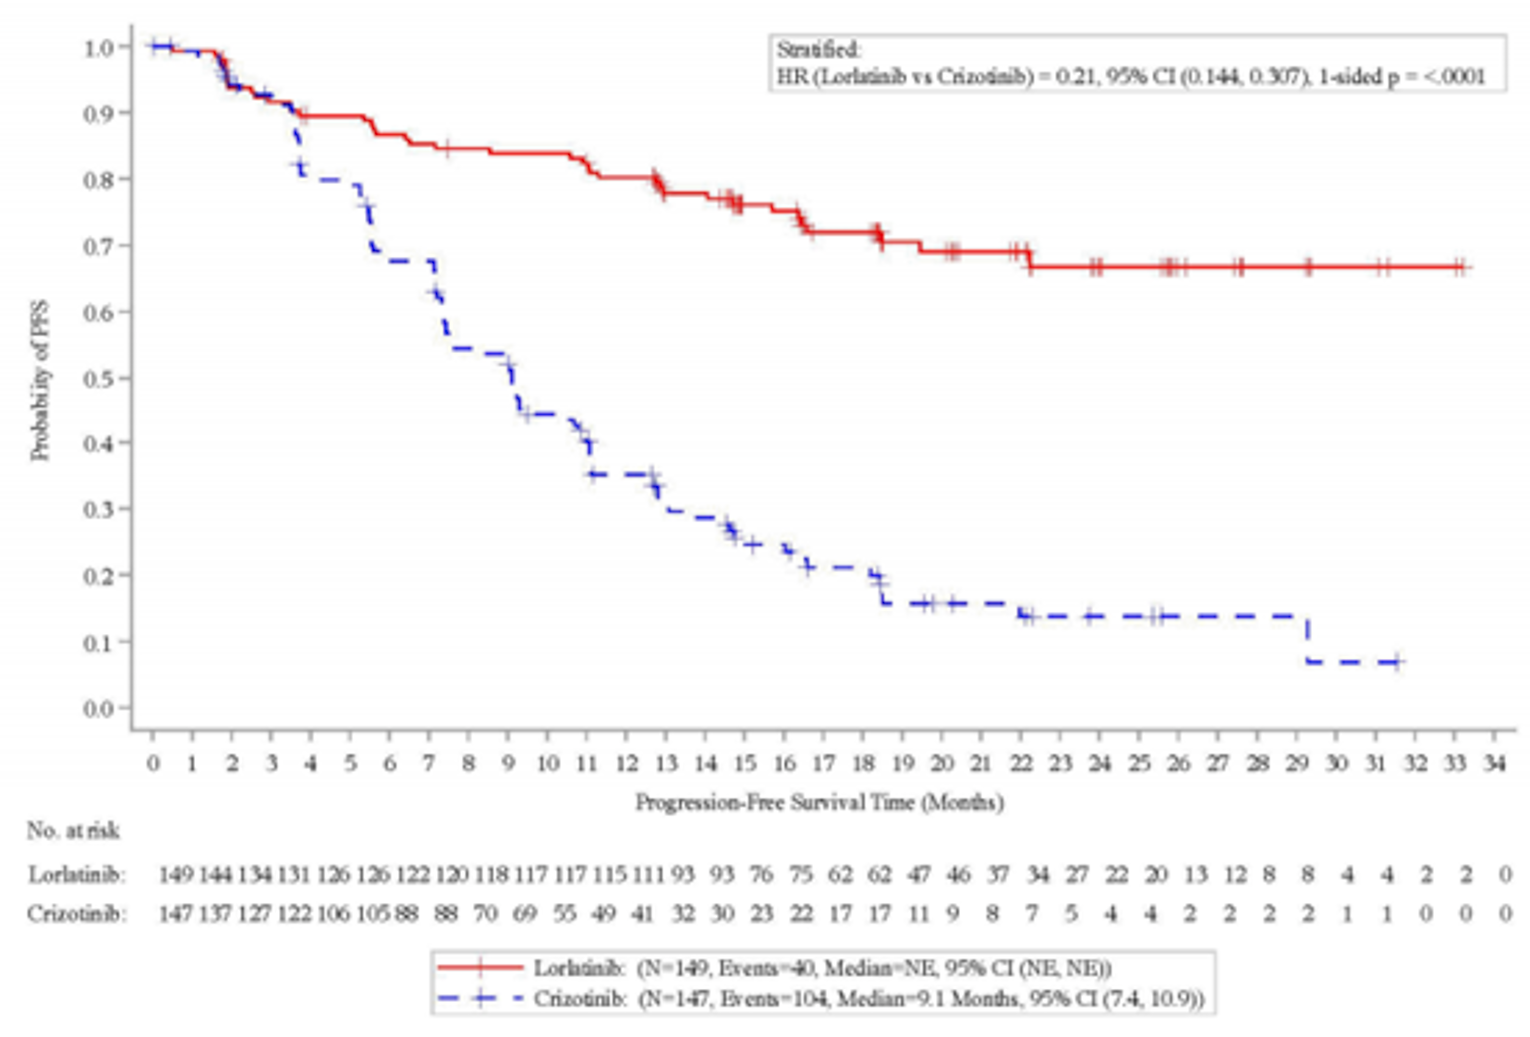 Kaplan-Meier plot depicting the progression-free survival as determined by investigator assessment between the lorlatinib and crizotinib groups for the CROWN trial at the time of the primary analysis.